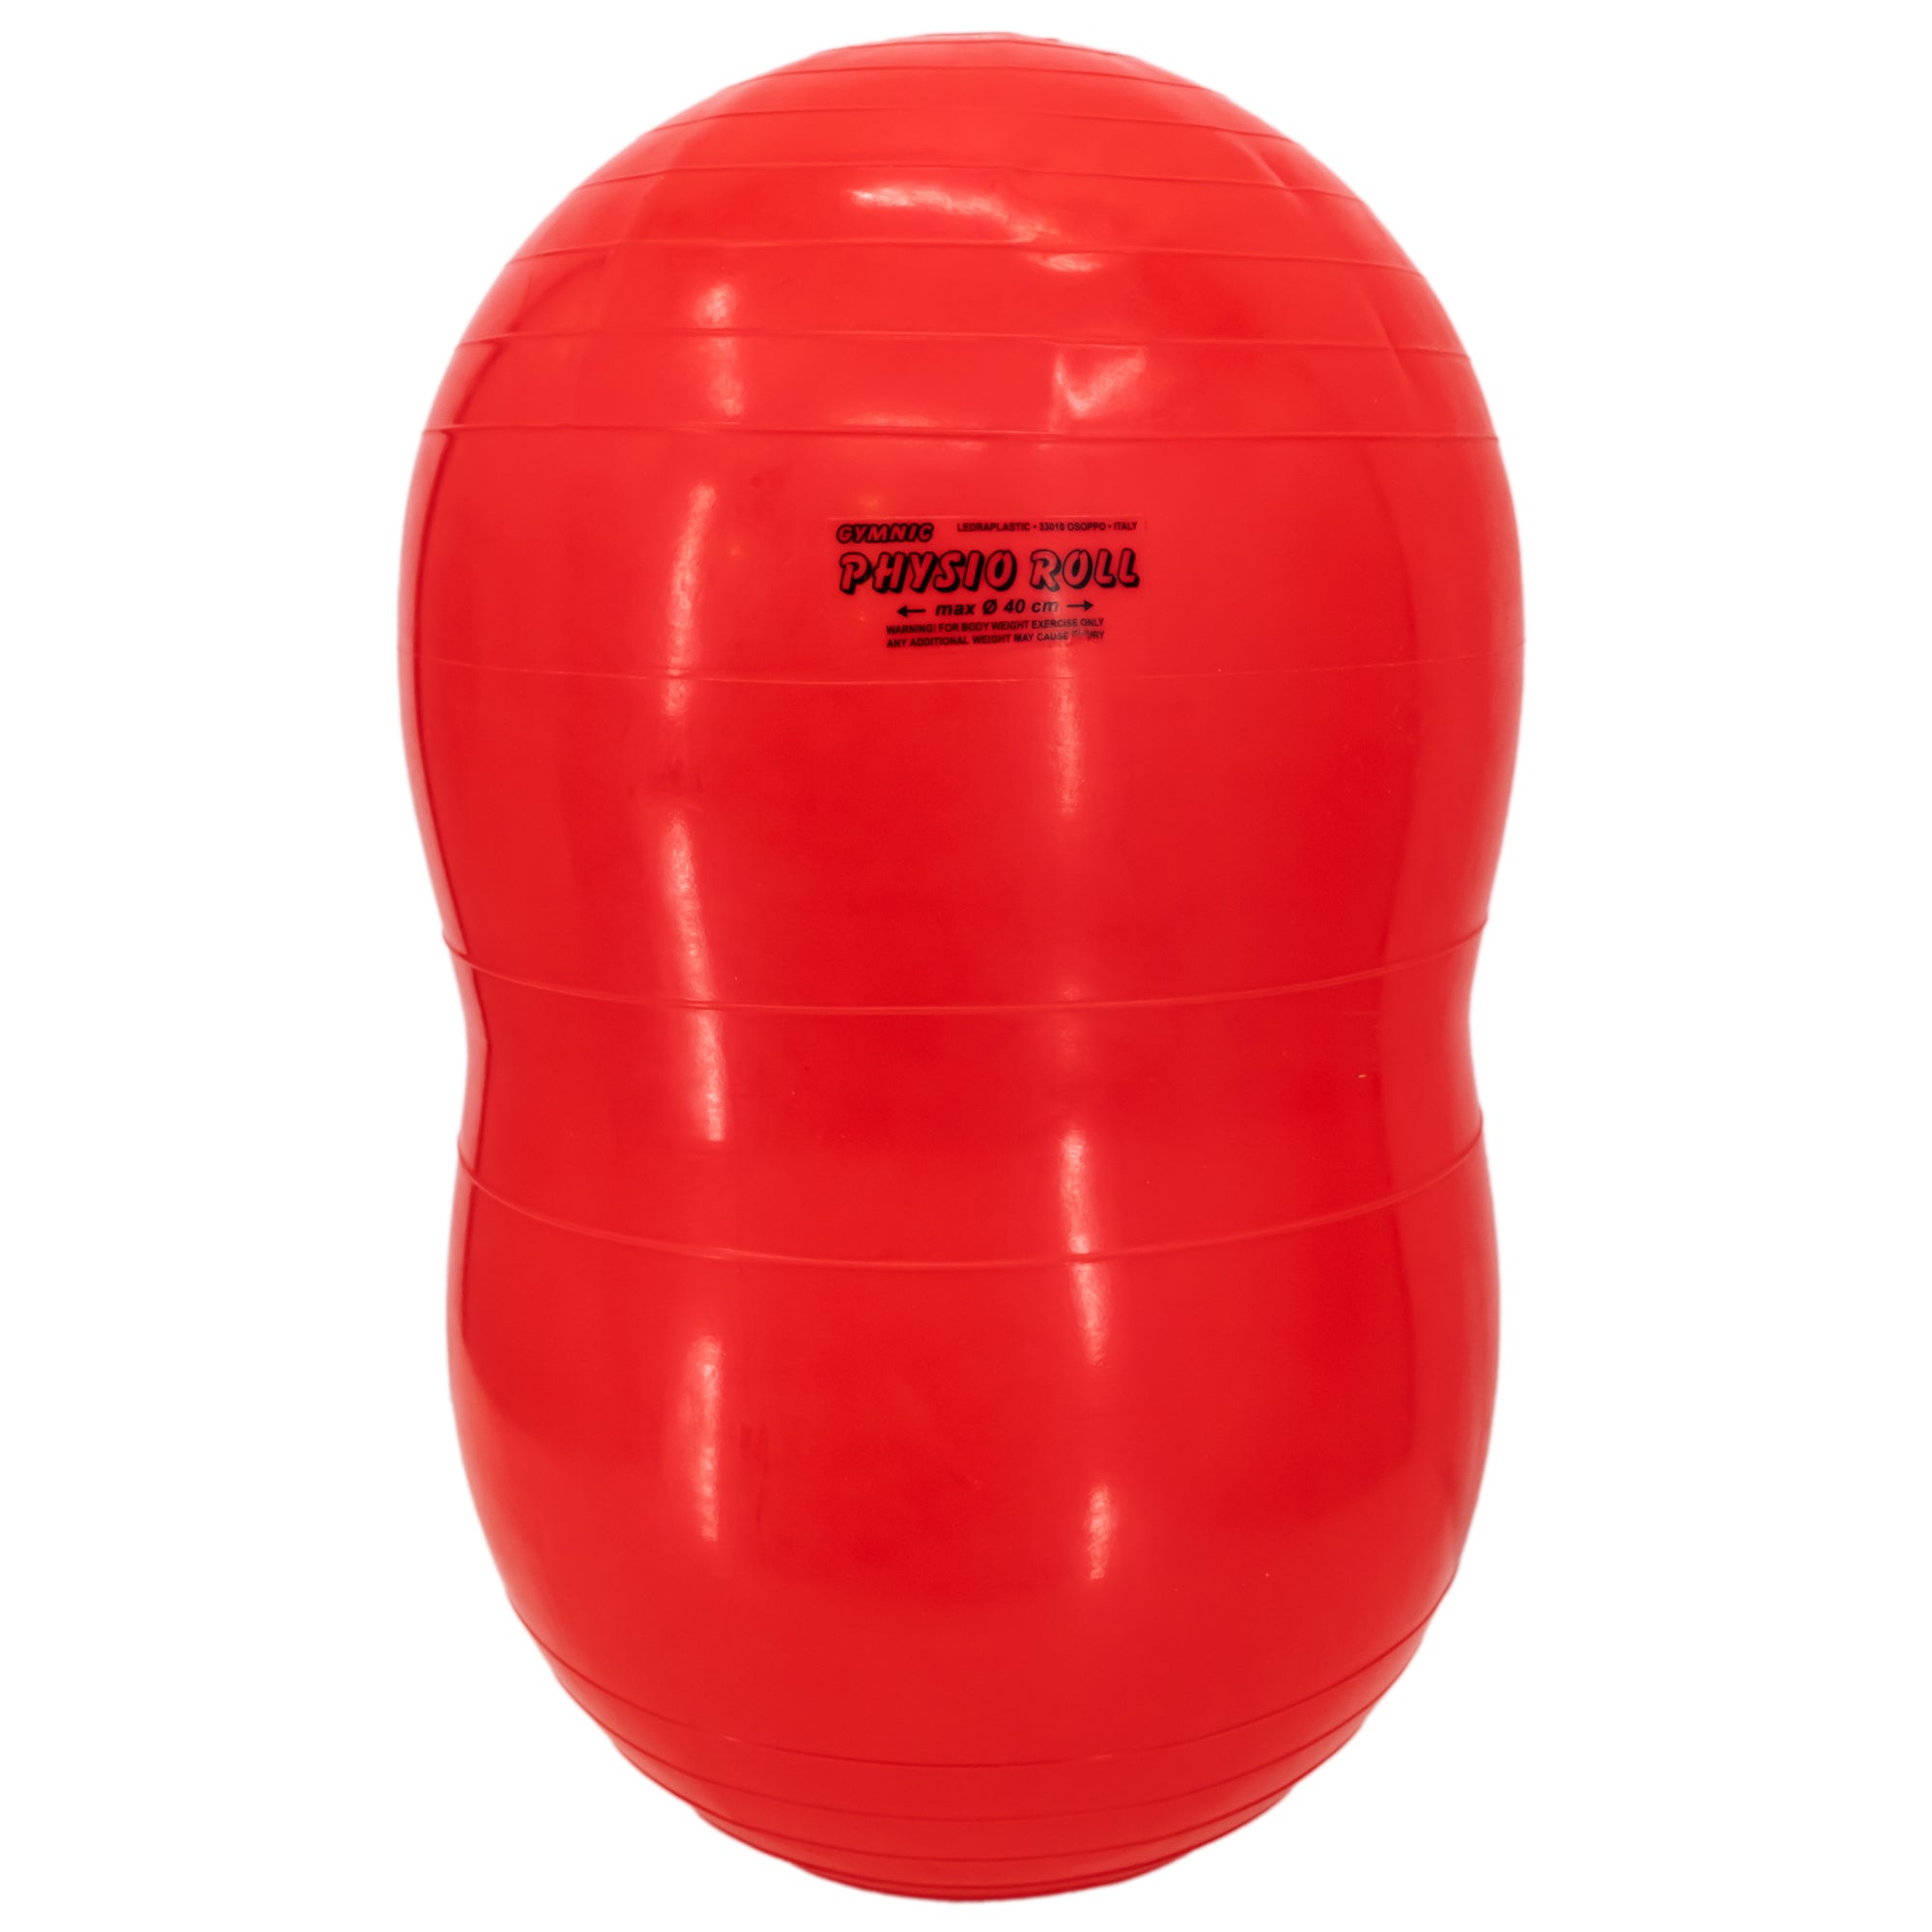 Gymnic Physio Roll ball in red standing to show the height. The large ball is peanut shaped for stability of little ones.